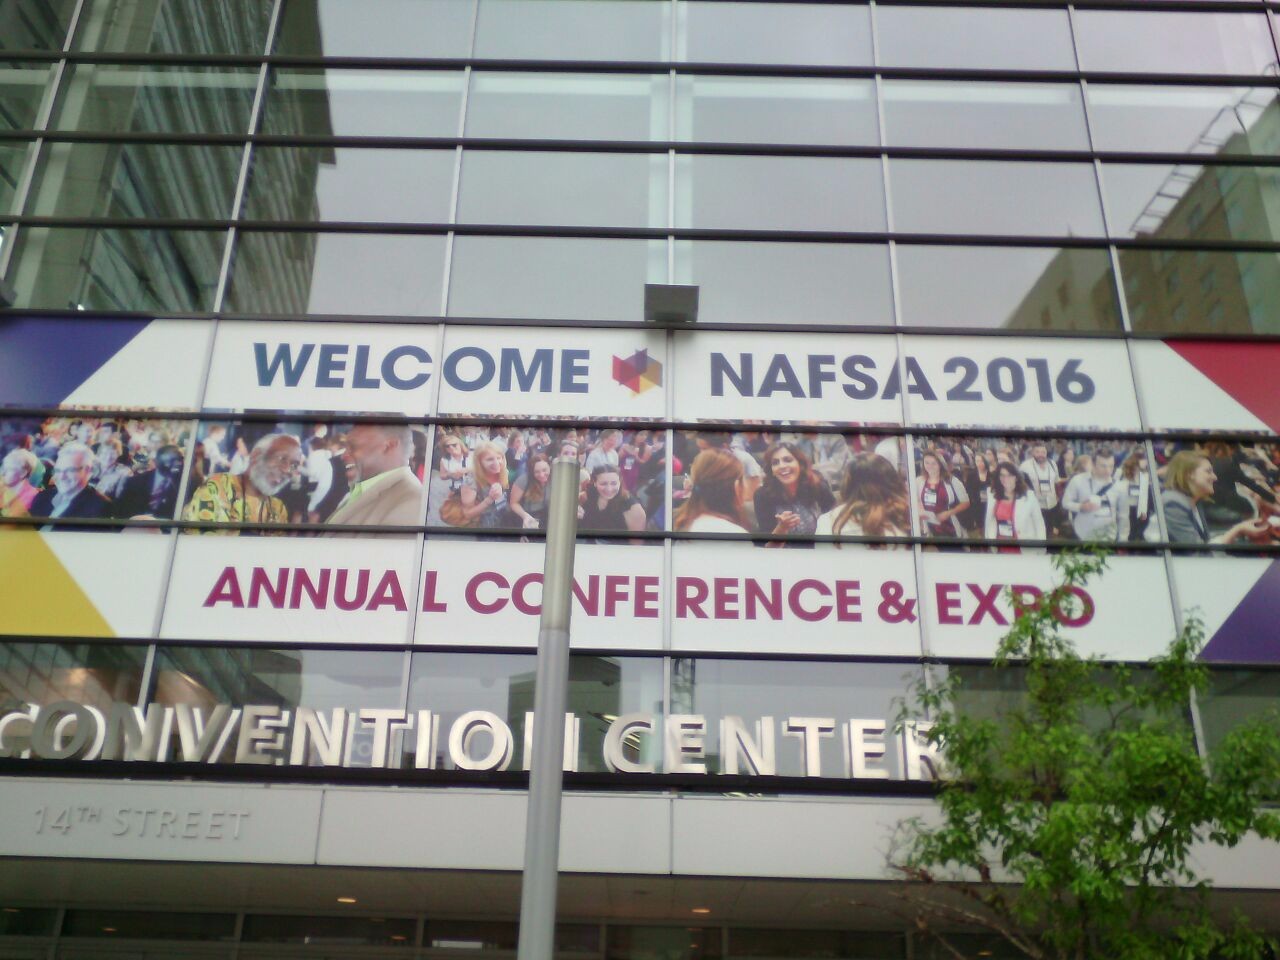      NAFSA Annual Conference & Expo   ,,   , 5  100, NAFSA, 